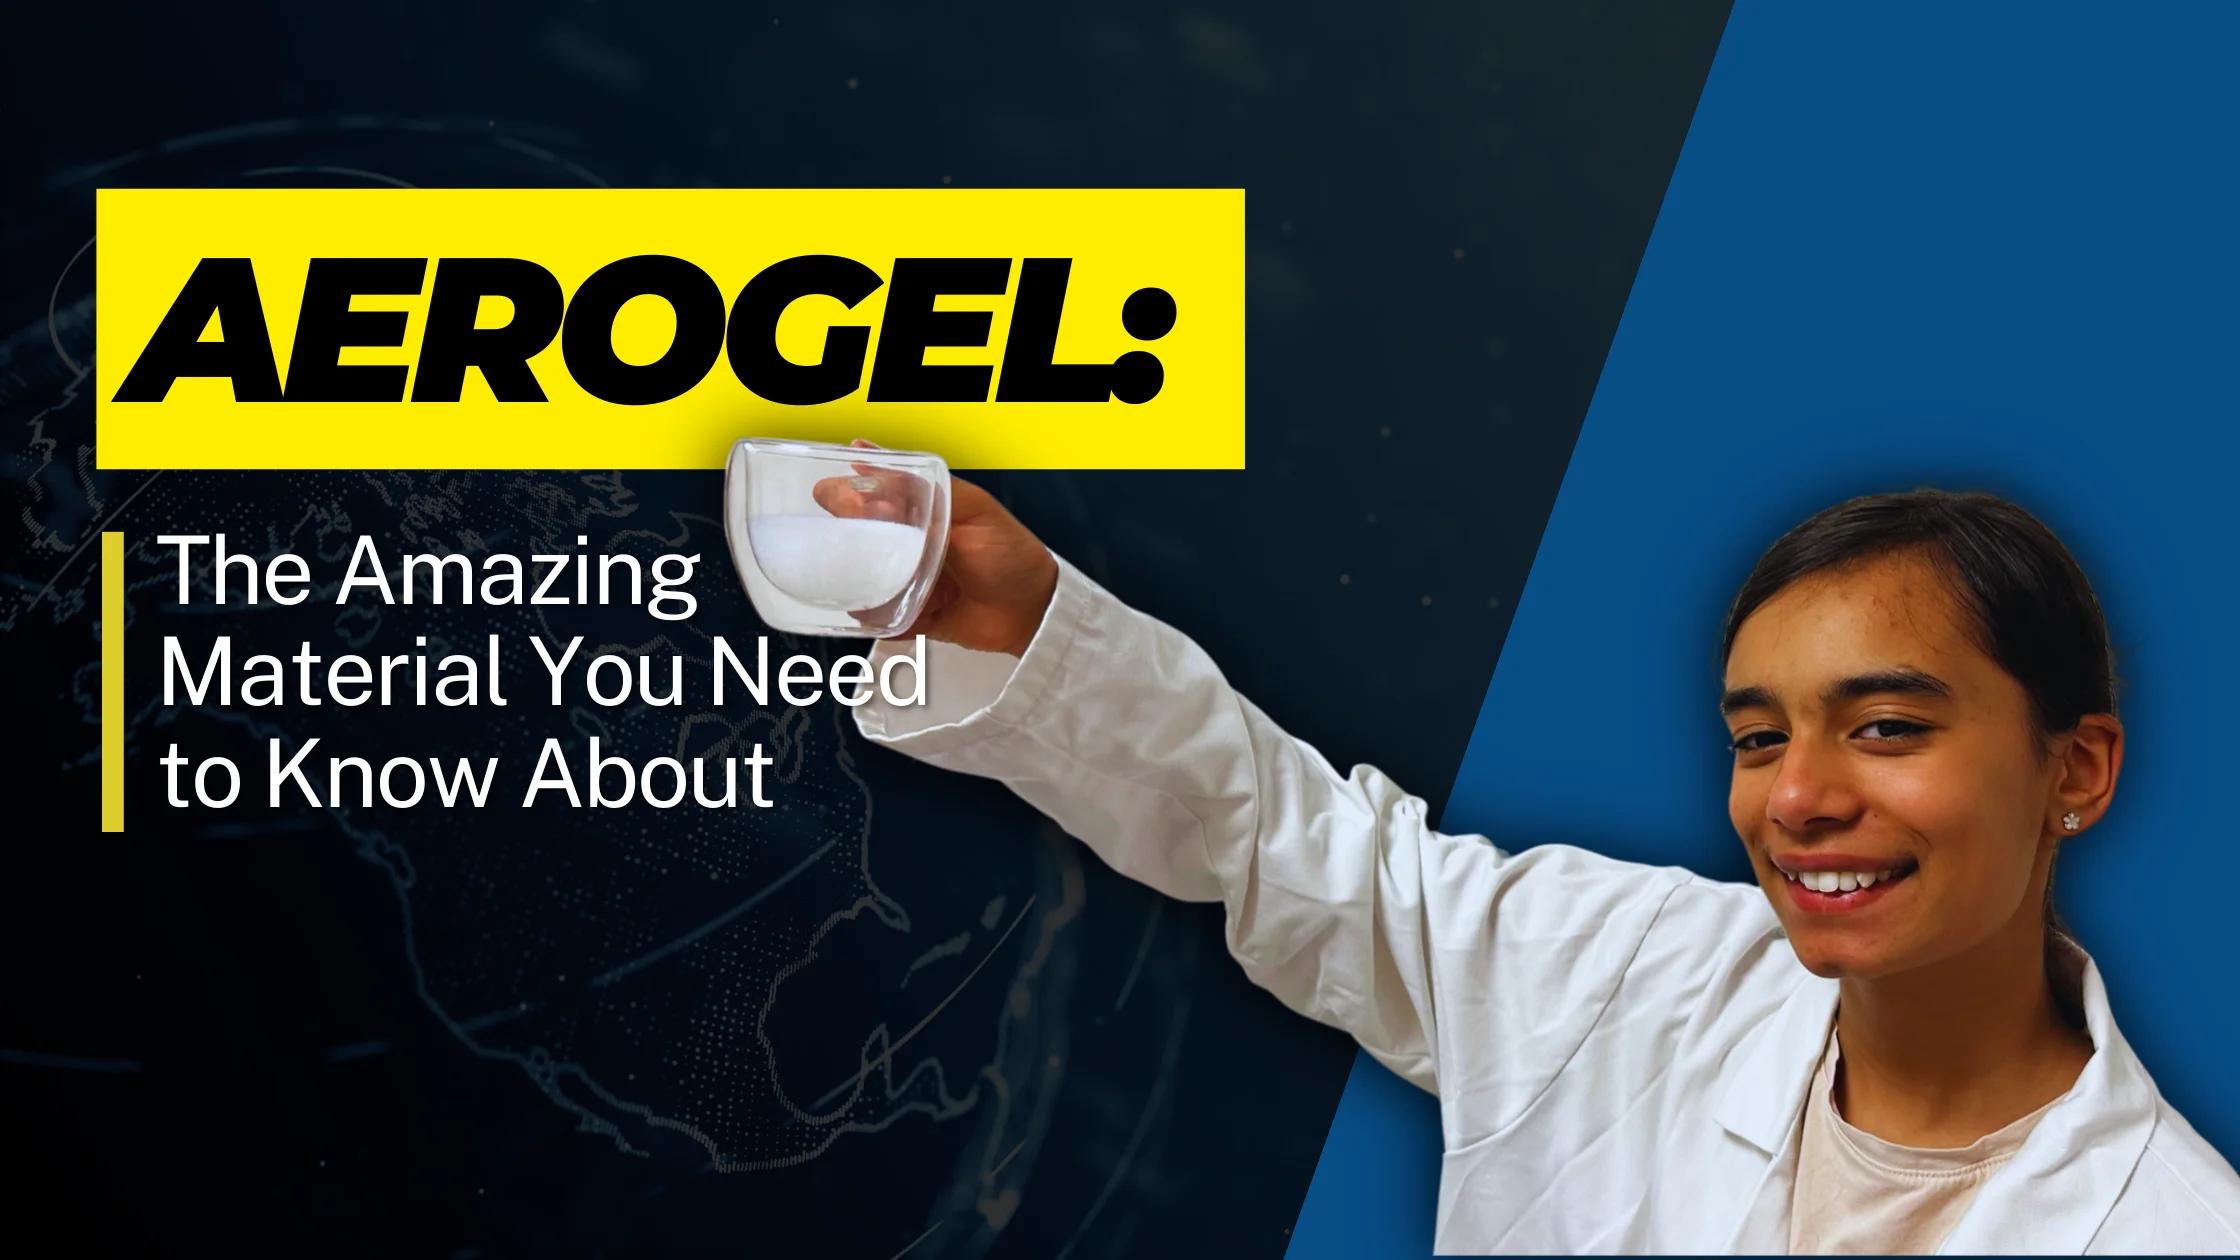 Aerogel The Amazing Material You Need to Know About